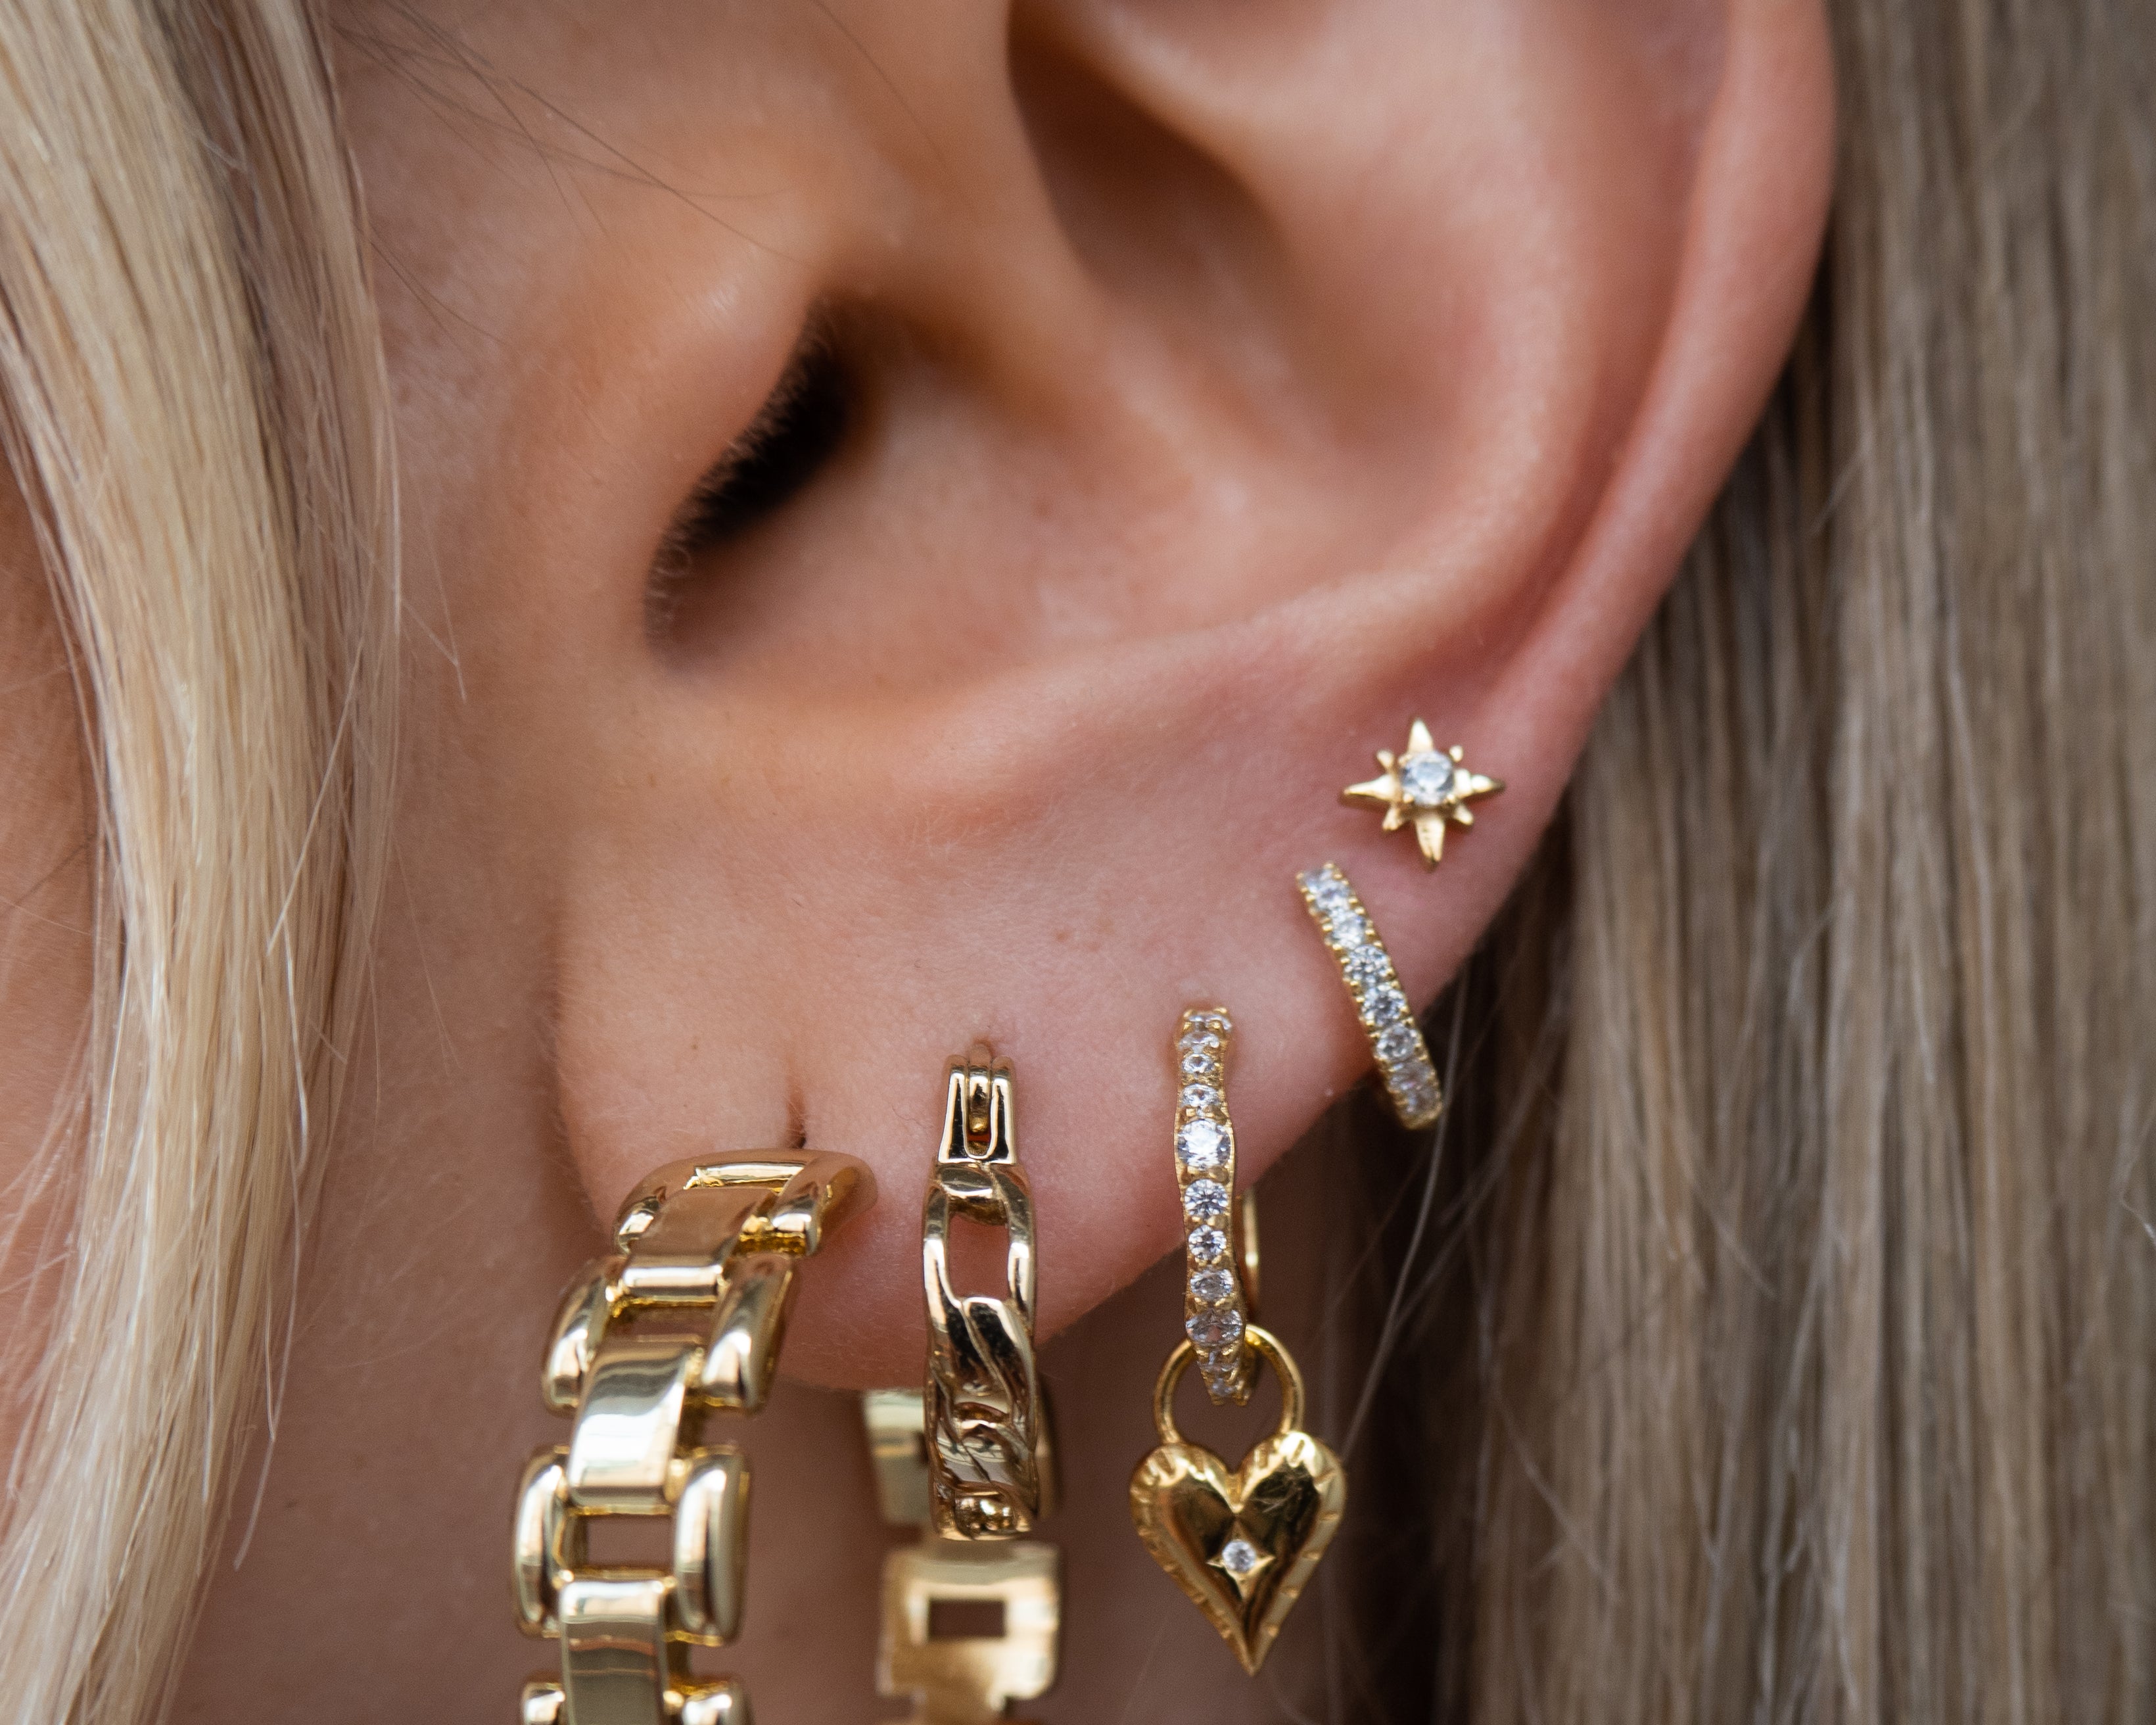 EARRINGS - five and two jewelry